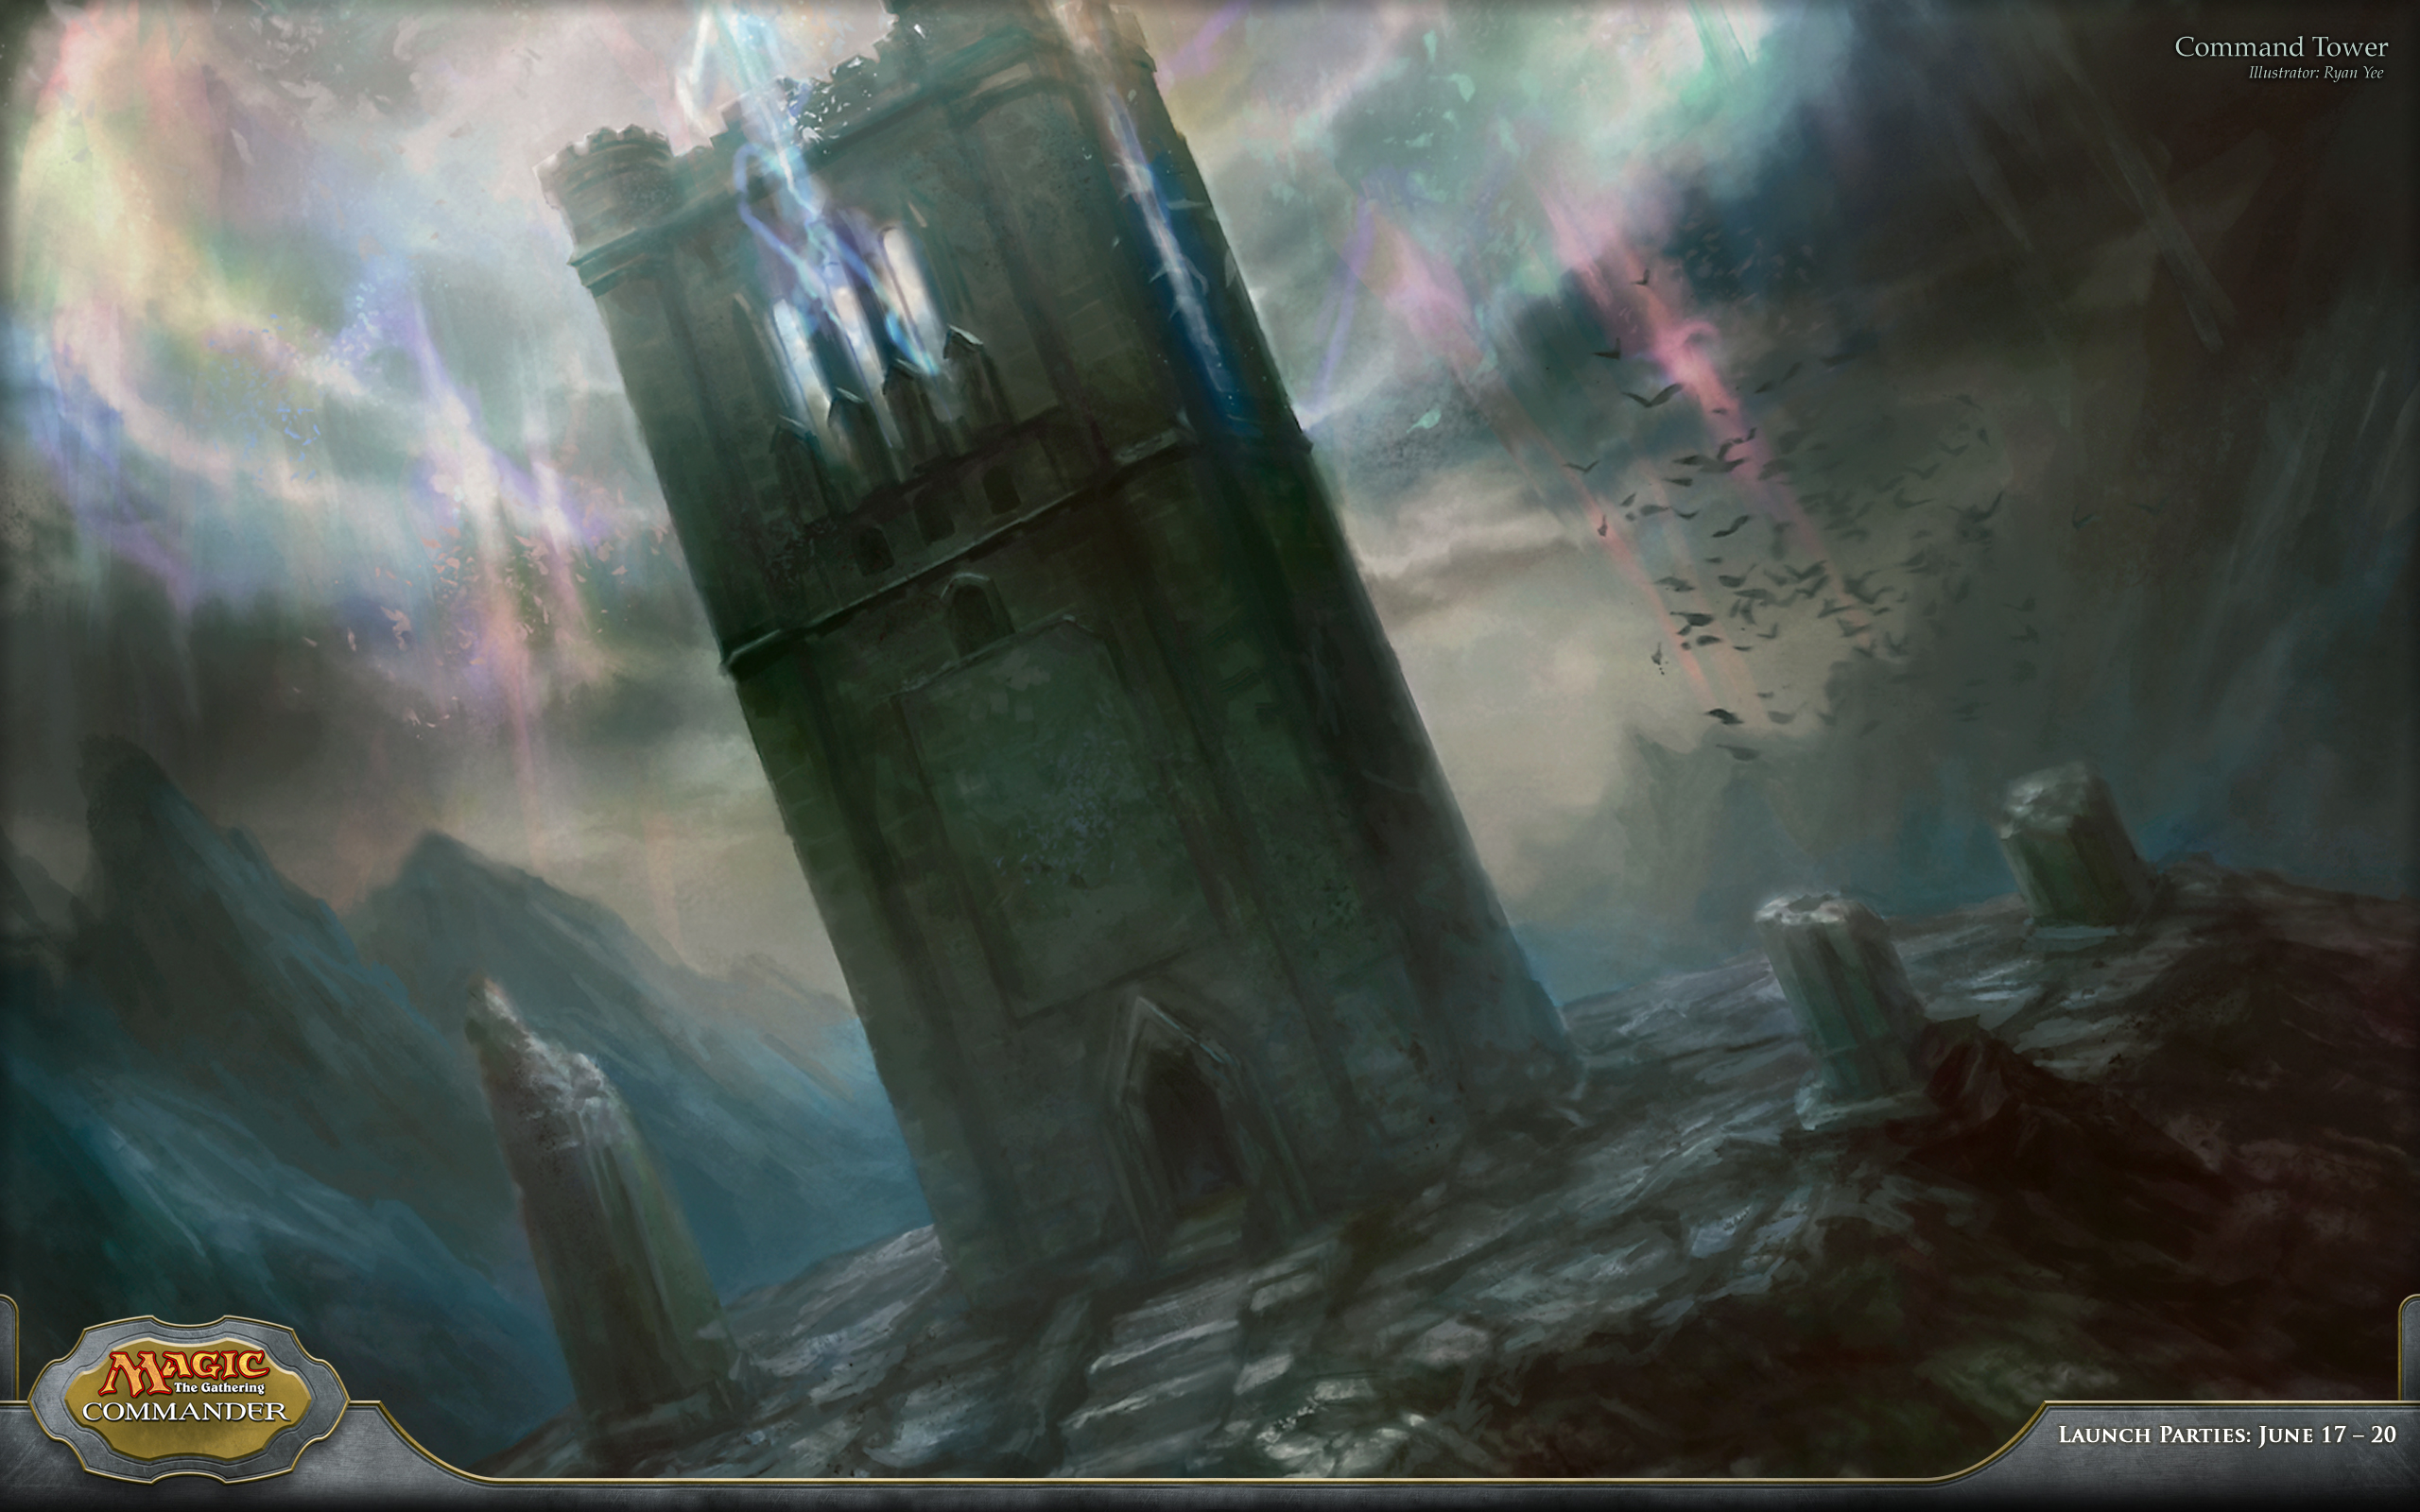 Wallpaper of the Week: Command Tower | MAGIC: THE GATHERING